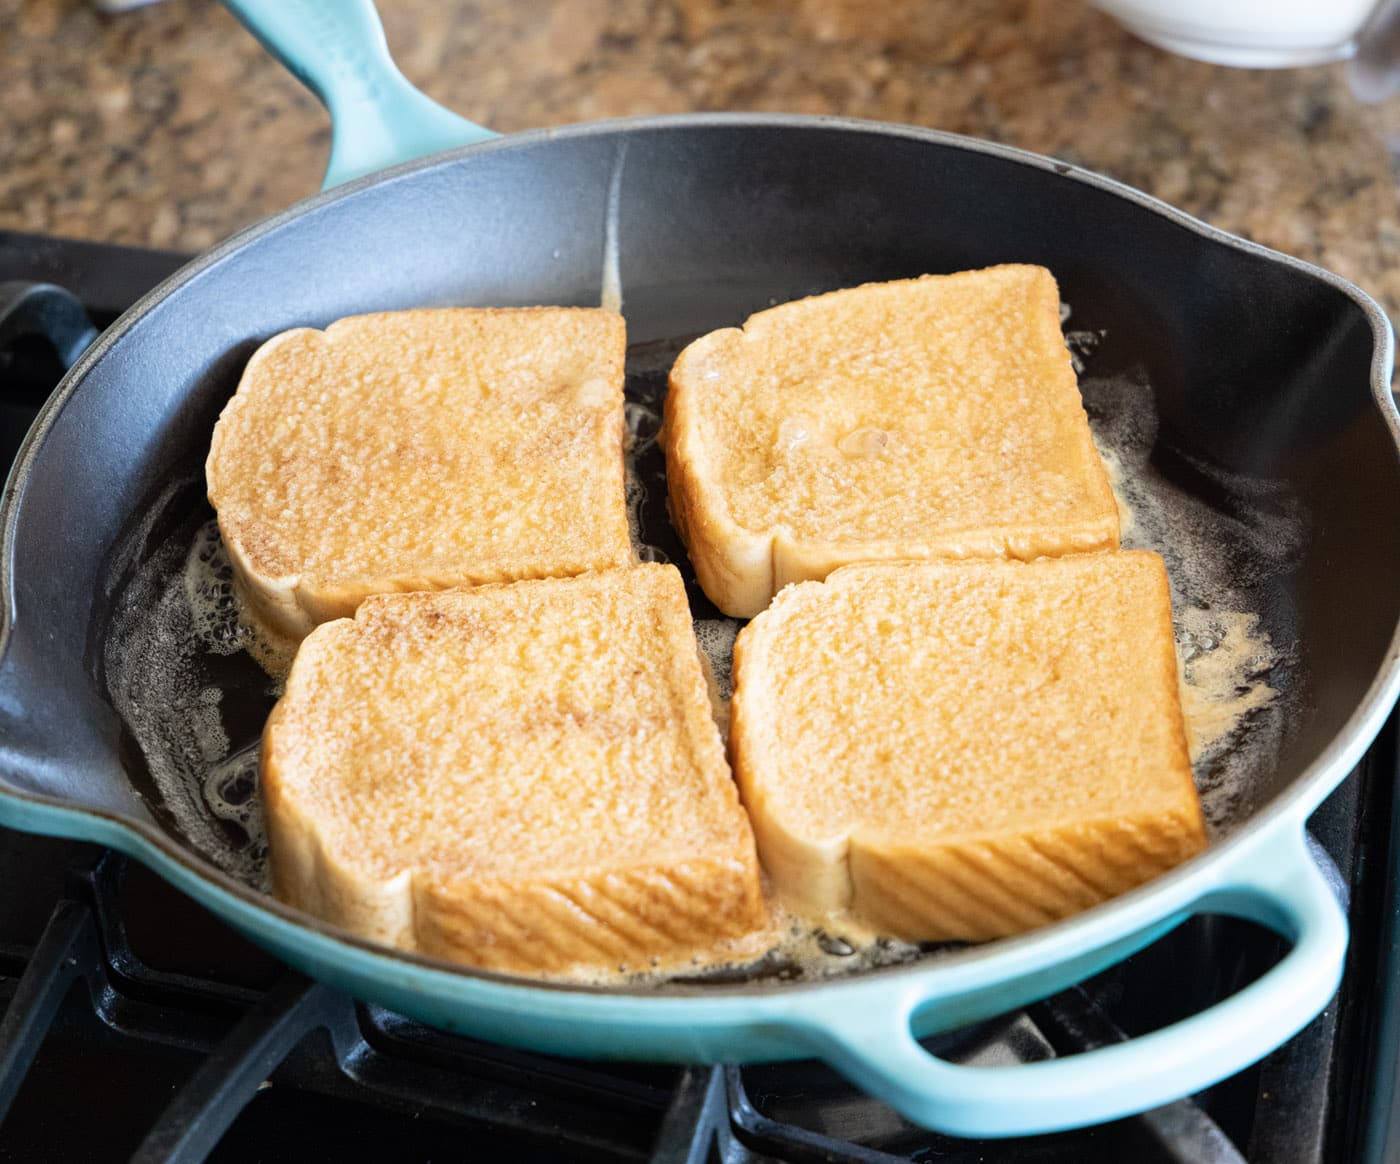 cooking french toast slices in a skillet